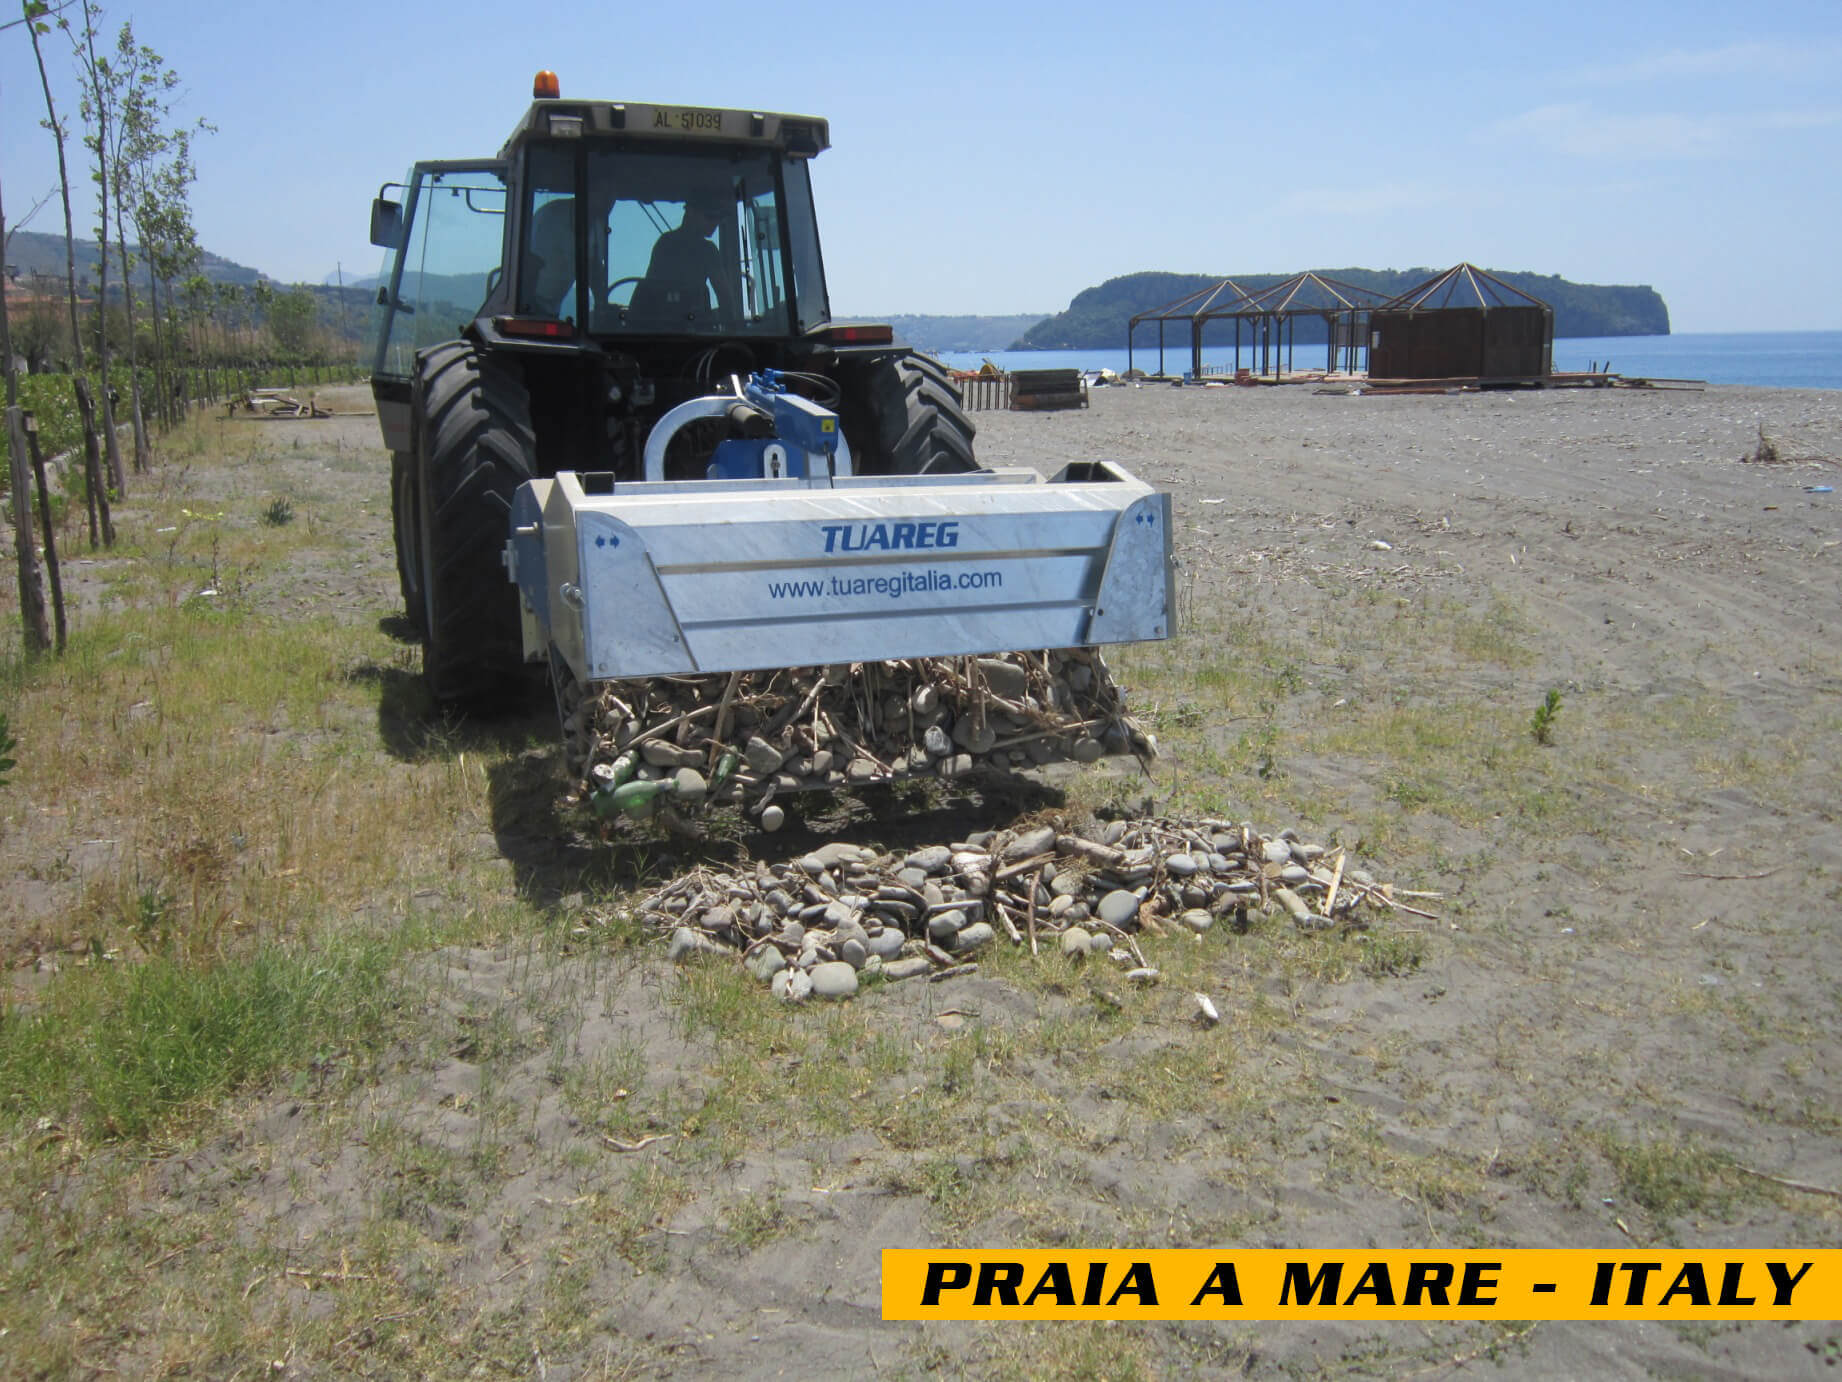 Public Administrations and Ministries - Care Cleaning and Reclamation